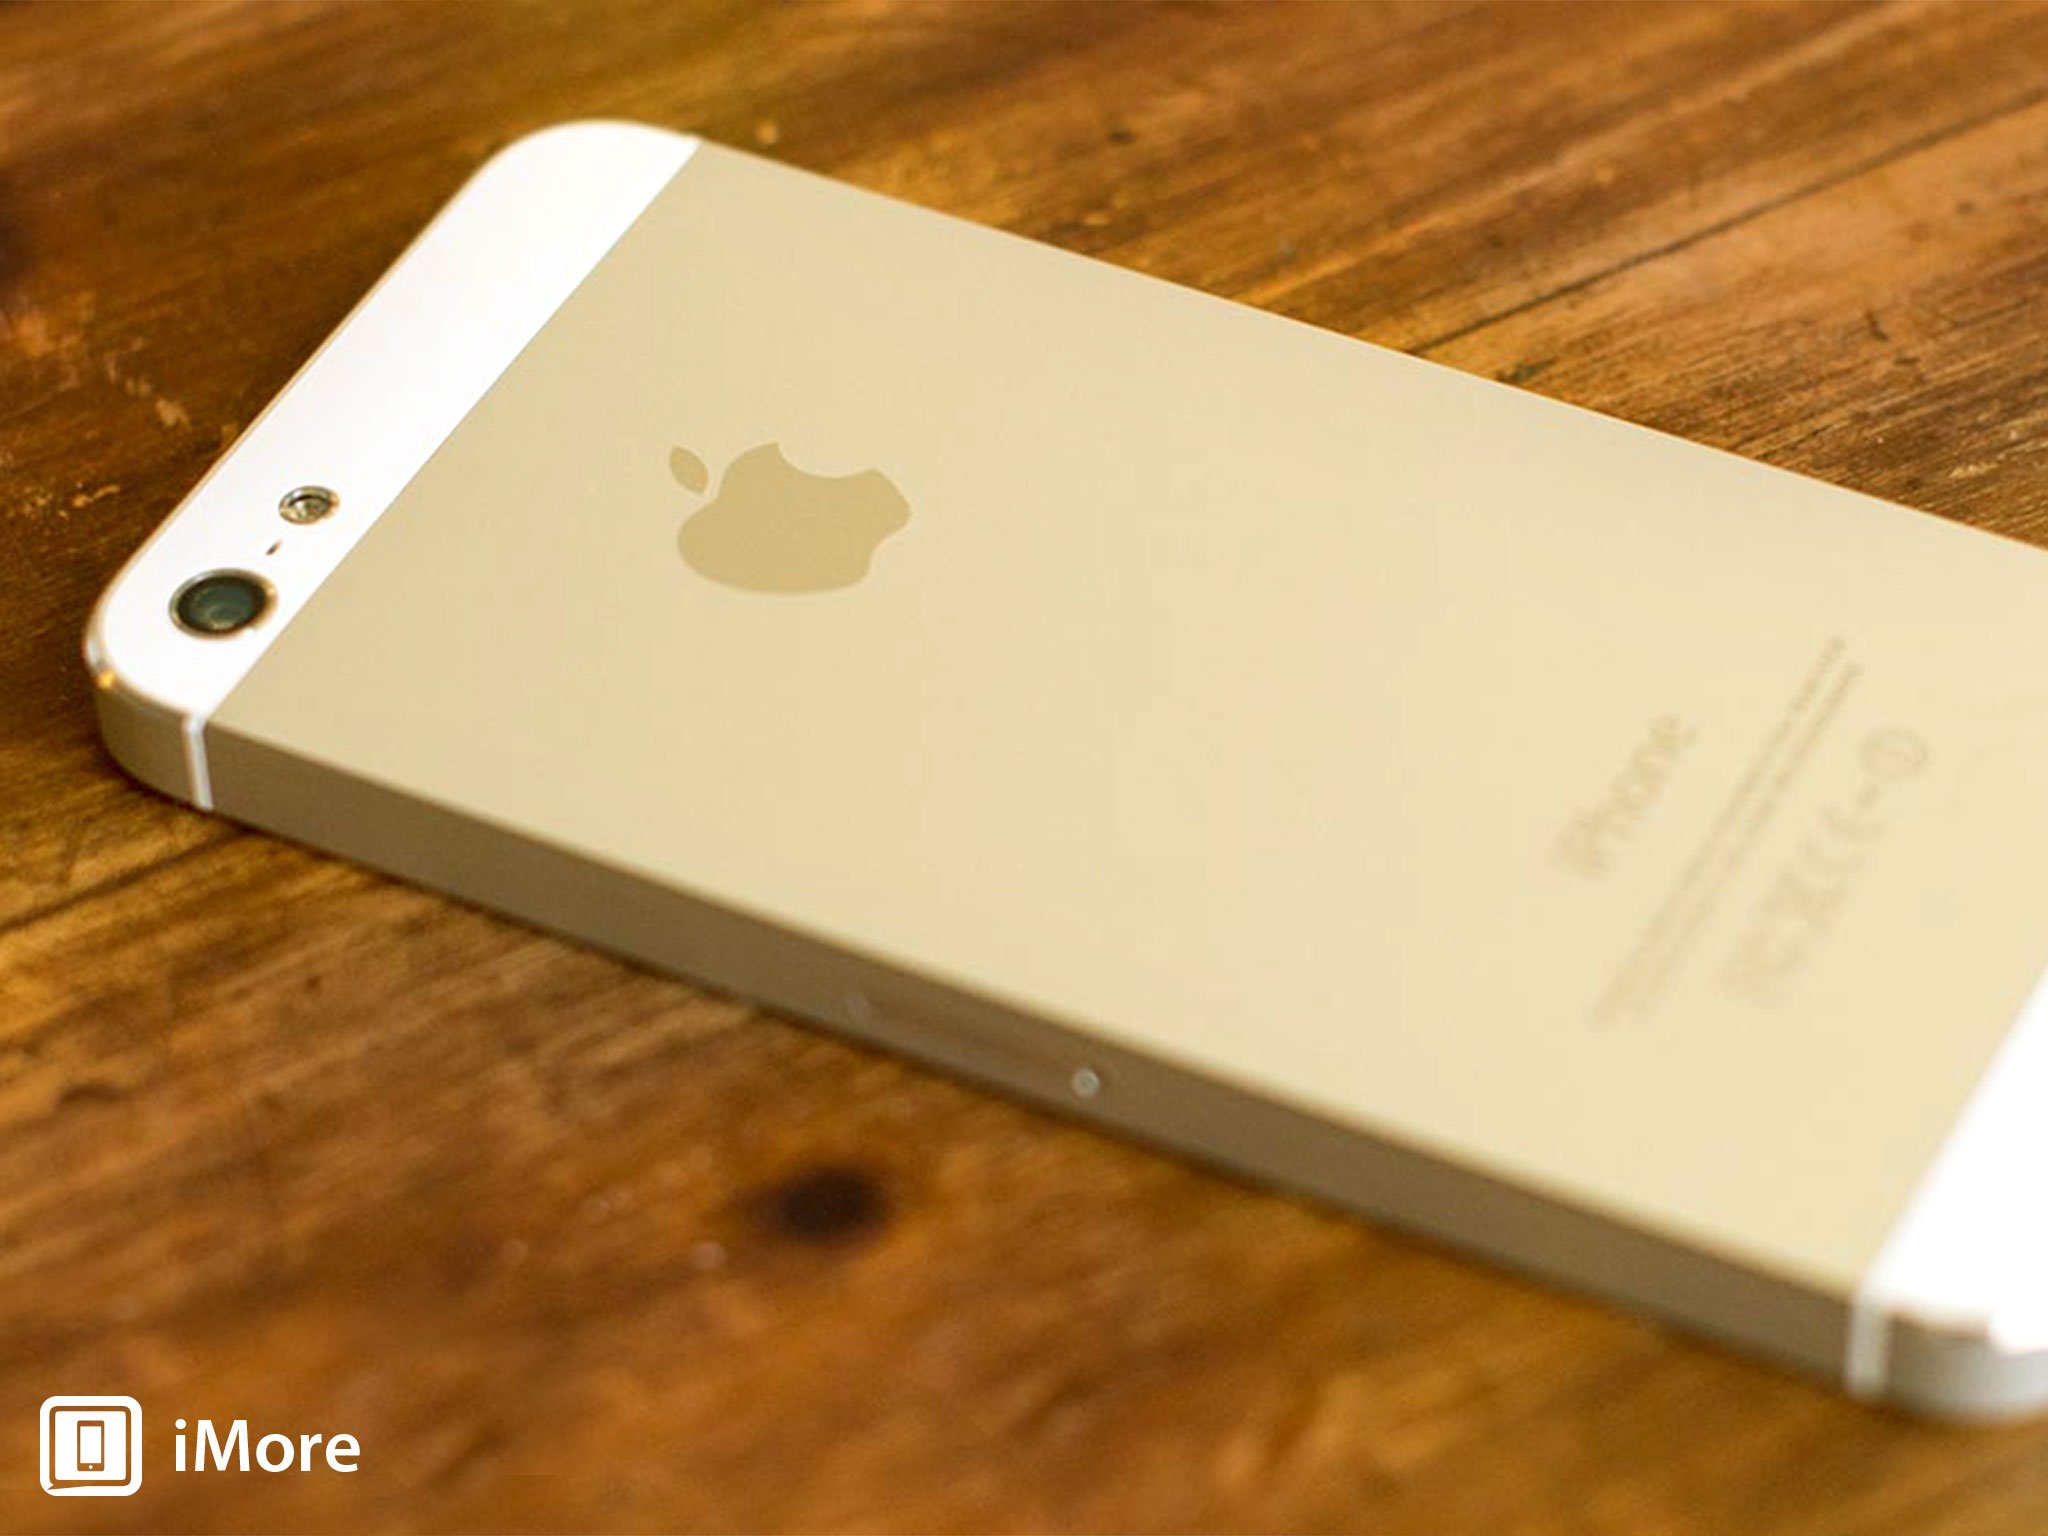 Would you want a gold-colored iPhone 5S? [Poll]